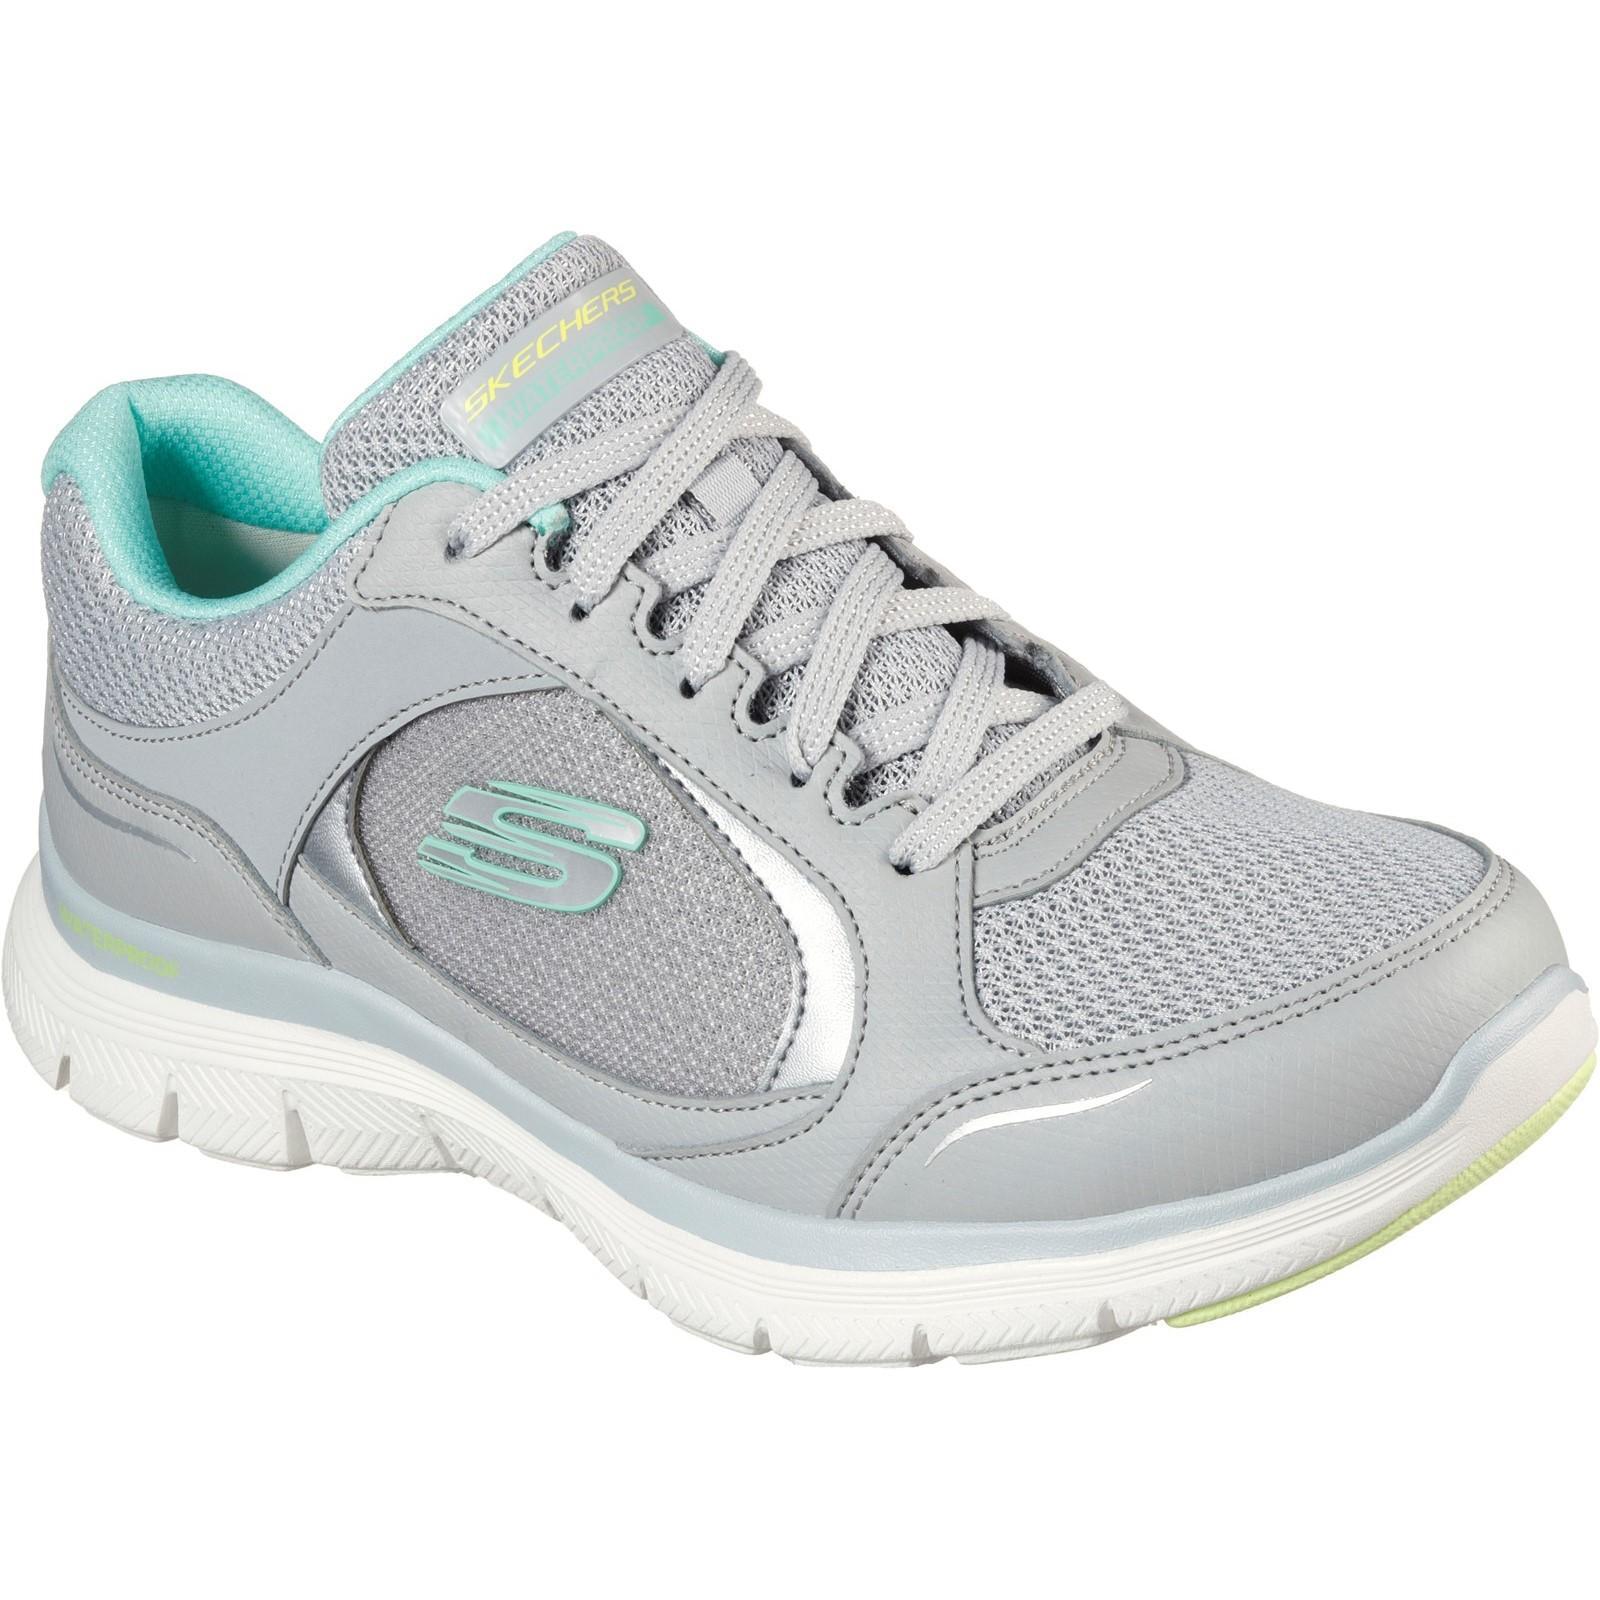 Womens/Ladies Flex Appeal 4.0 True Clarity Trainers (Grey/Turquoise) 1/5